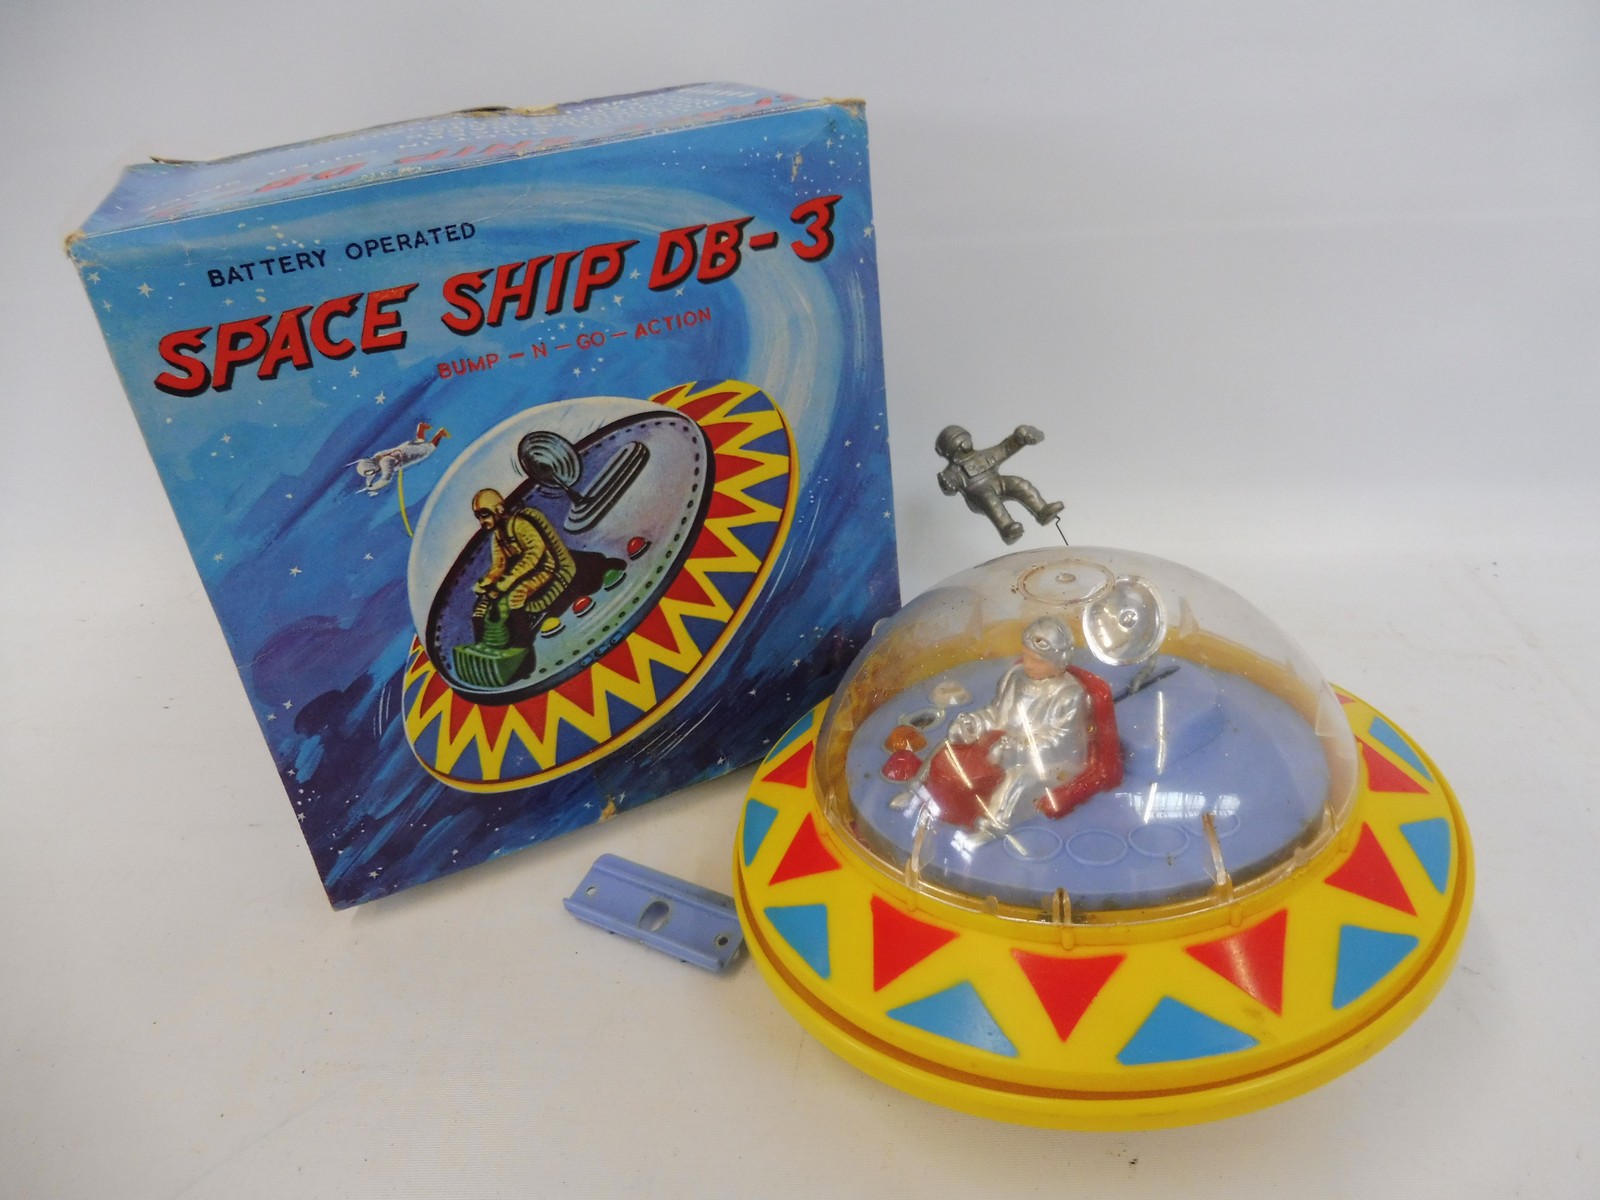 A boxed battery operated Space Ship DB-3, made in Hong Kong.